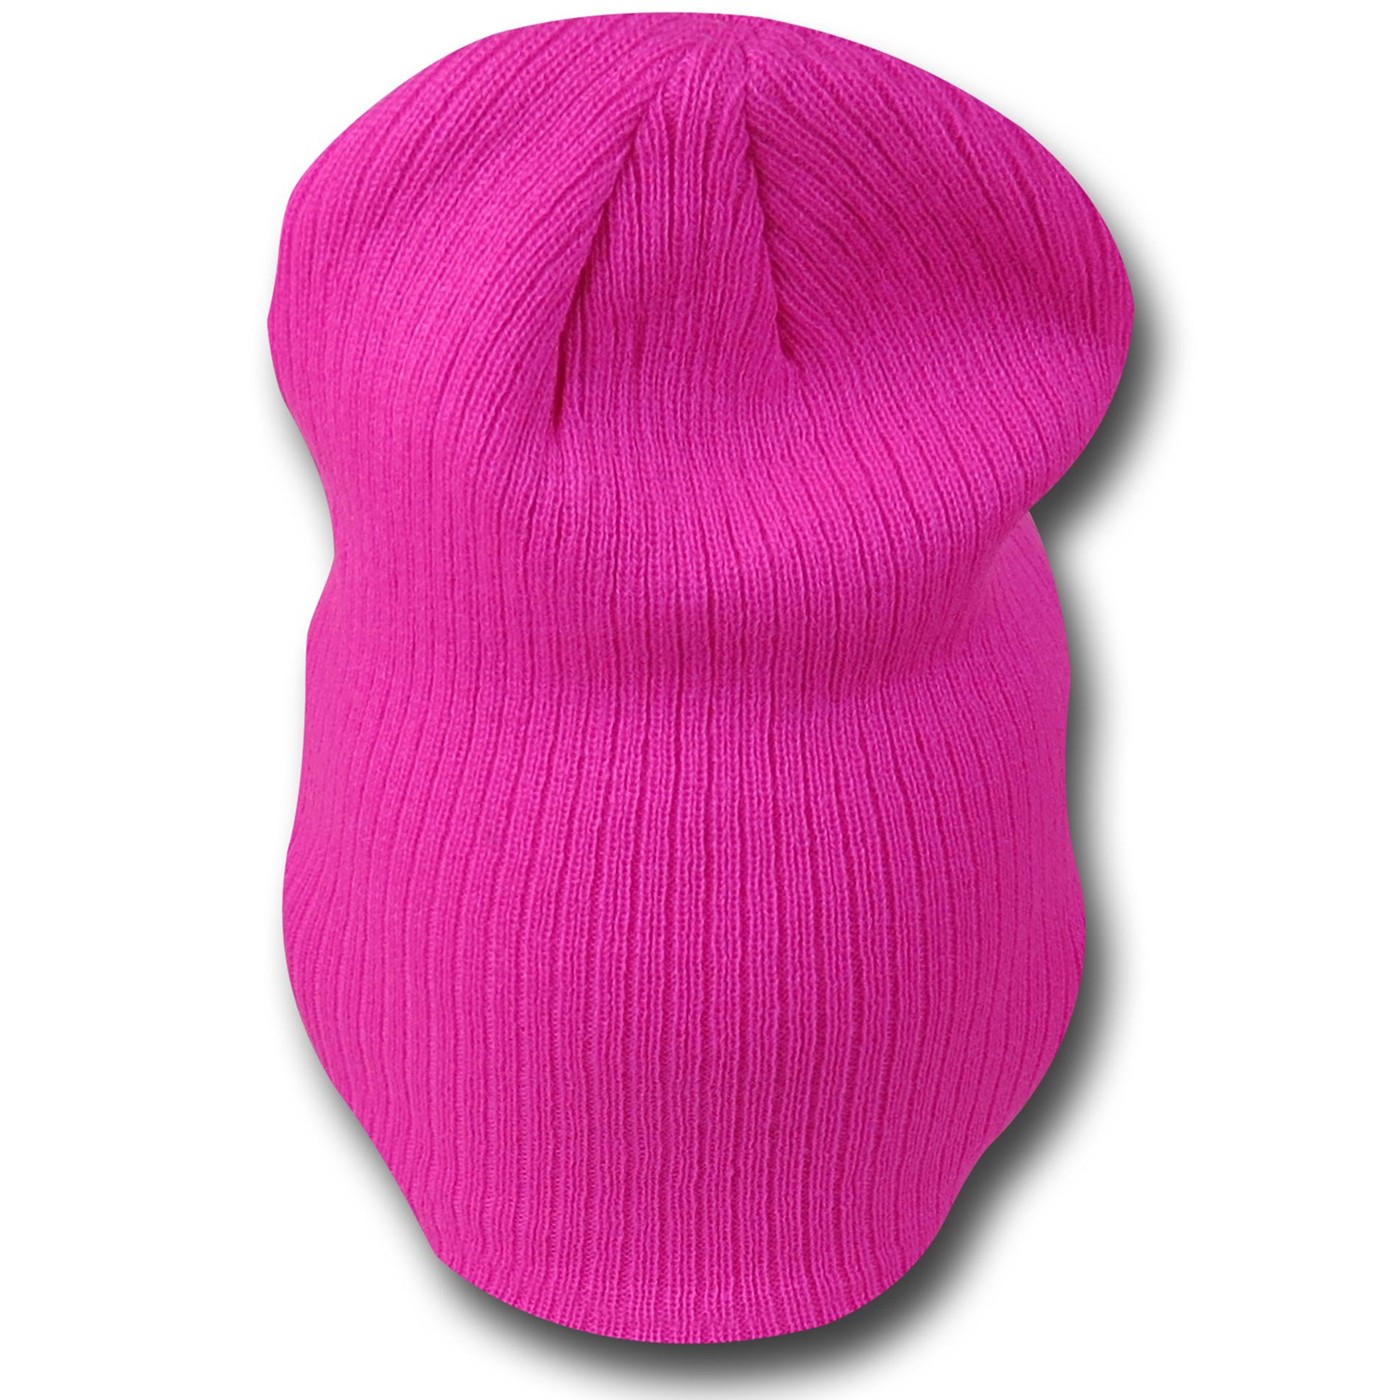 Supergirl Pink Slouch Beanie